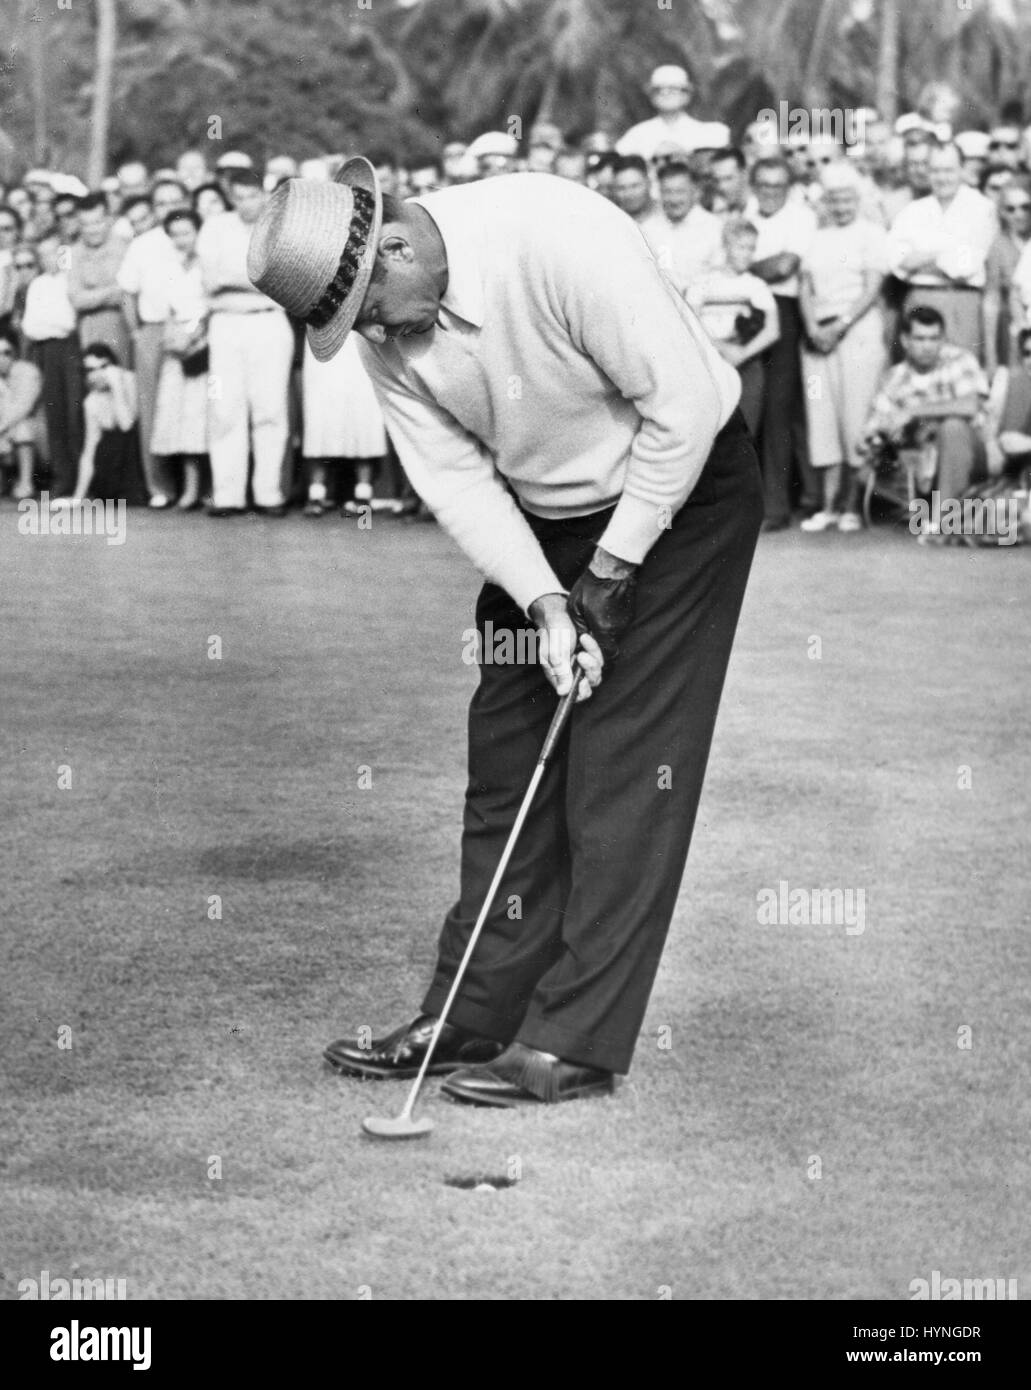 Sammy Snead sinks a putt to beat Tommy Bolt on the first hole of a playoff for the Miami Open Golf Tournament title. Miami, FL, 12/14/55. Stock Photo